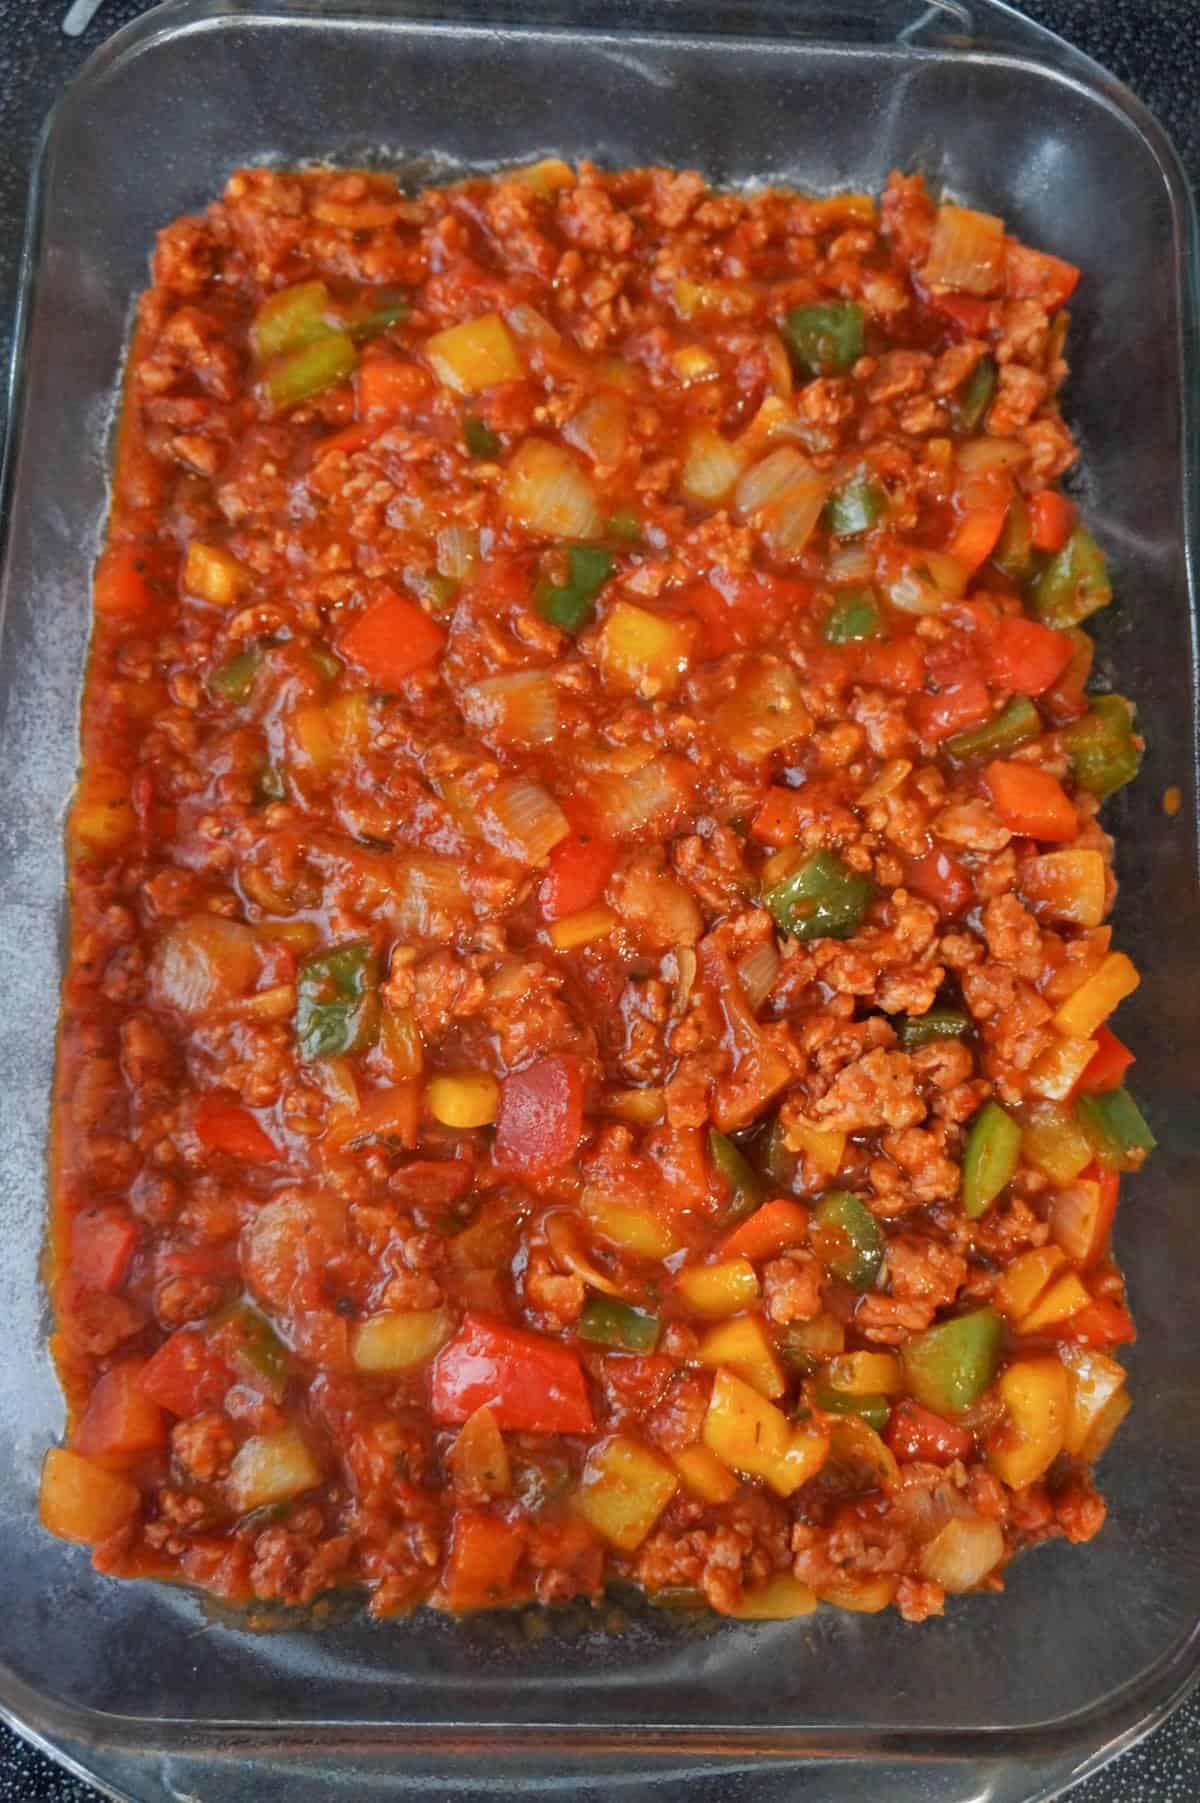 sausage and peppers mixture in a baking dish